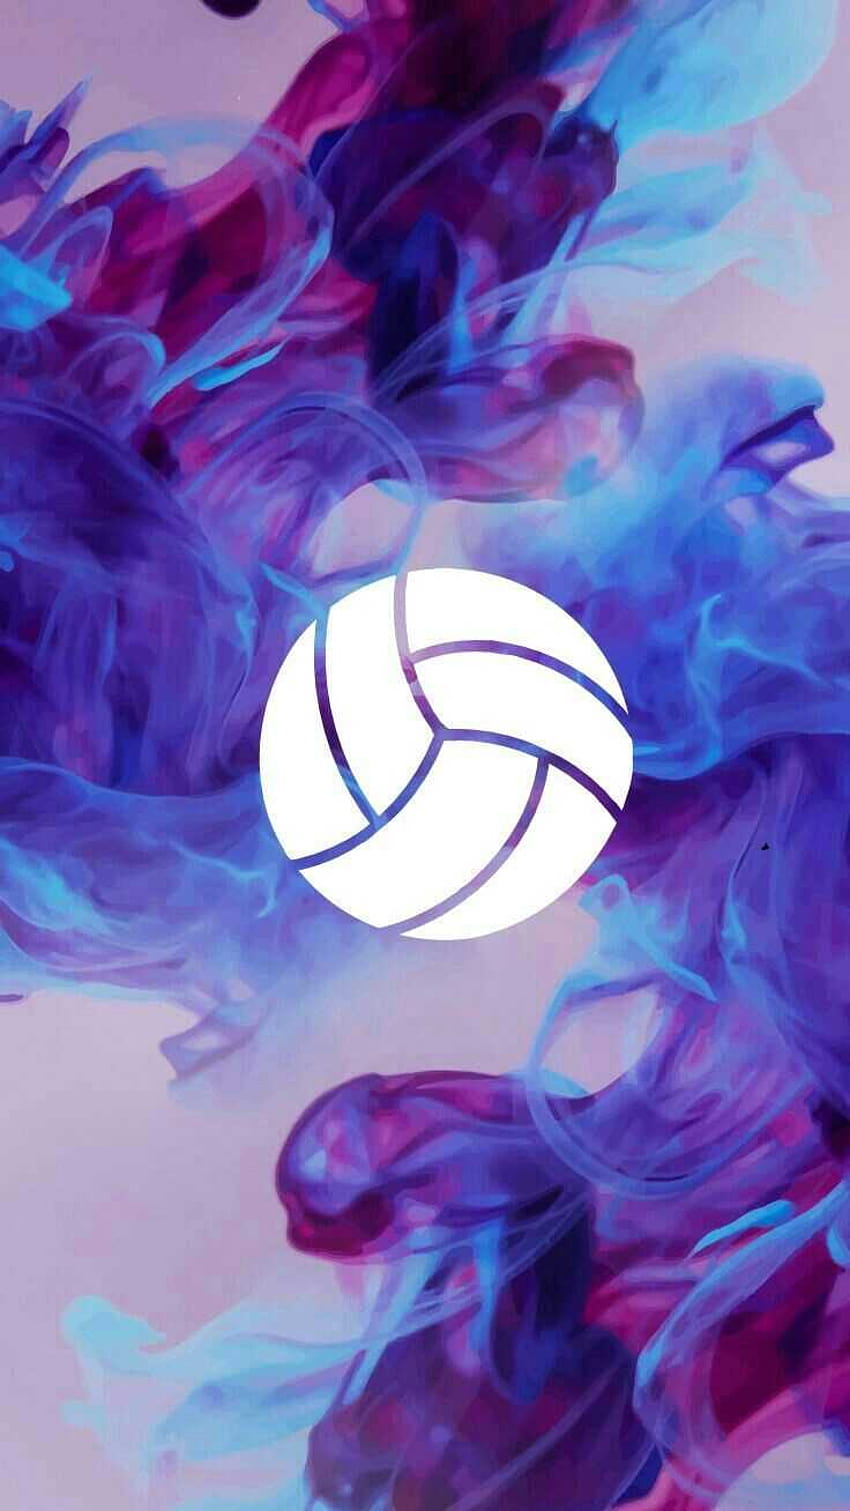 The volleyball logo is in purple and blue - Volleyball